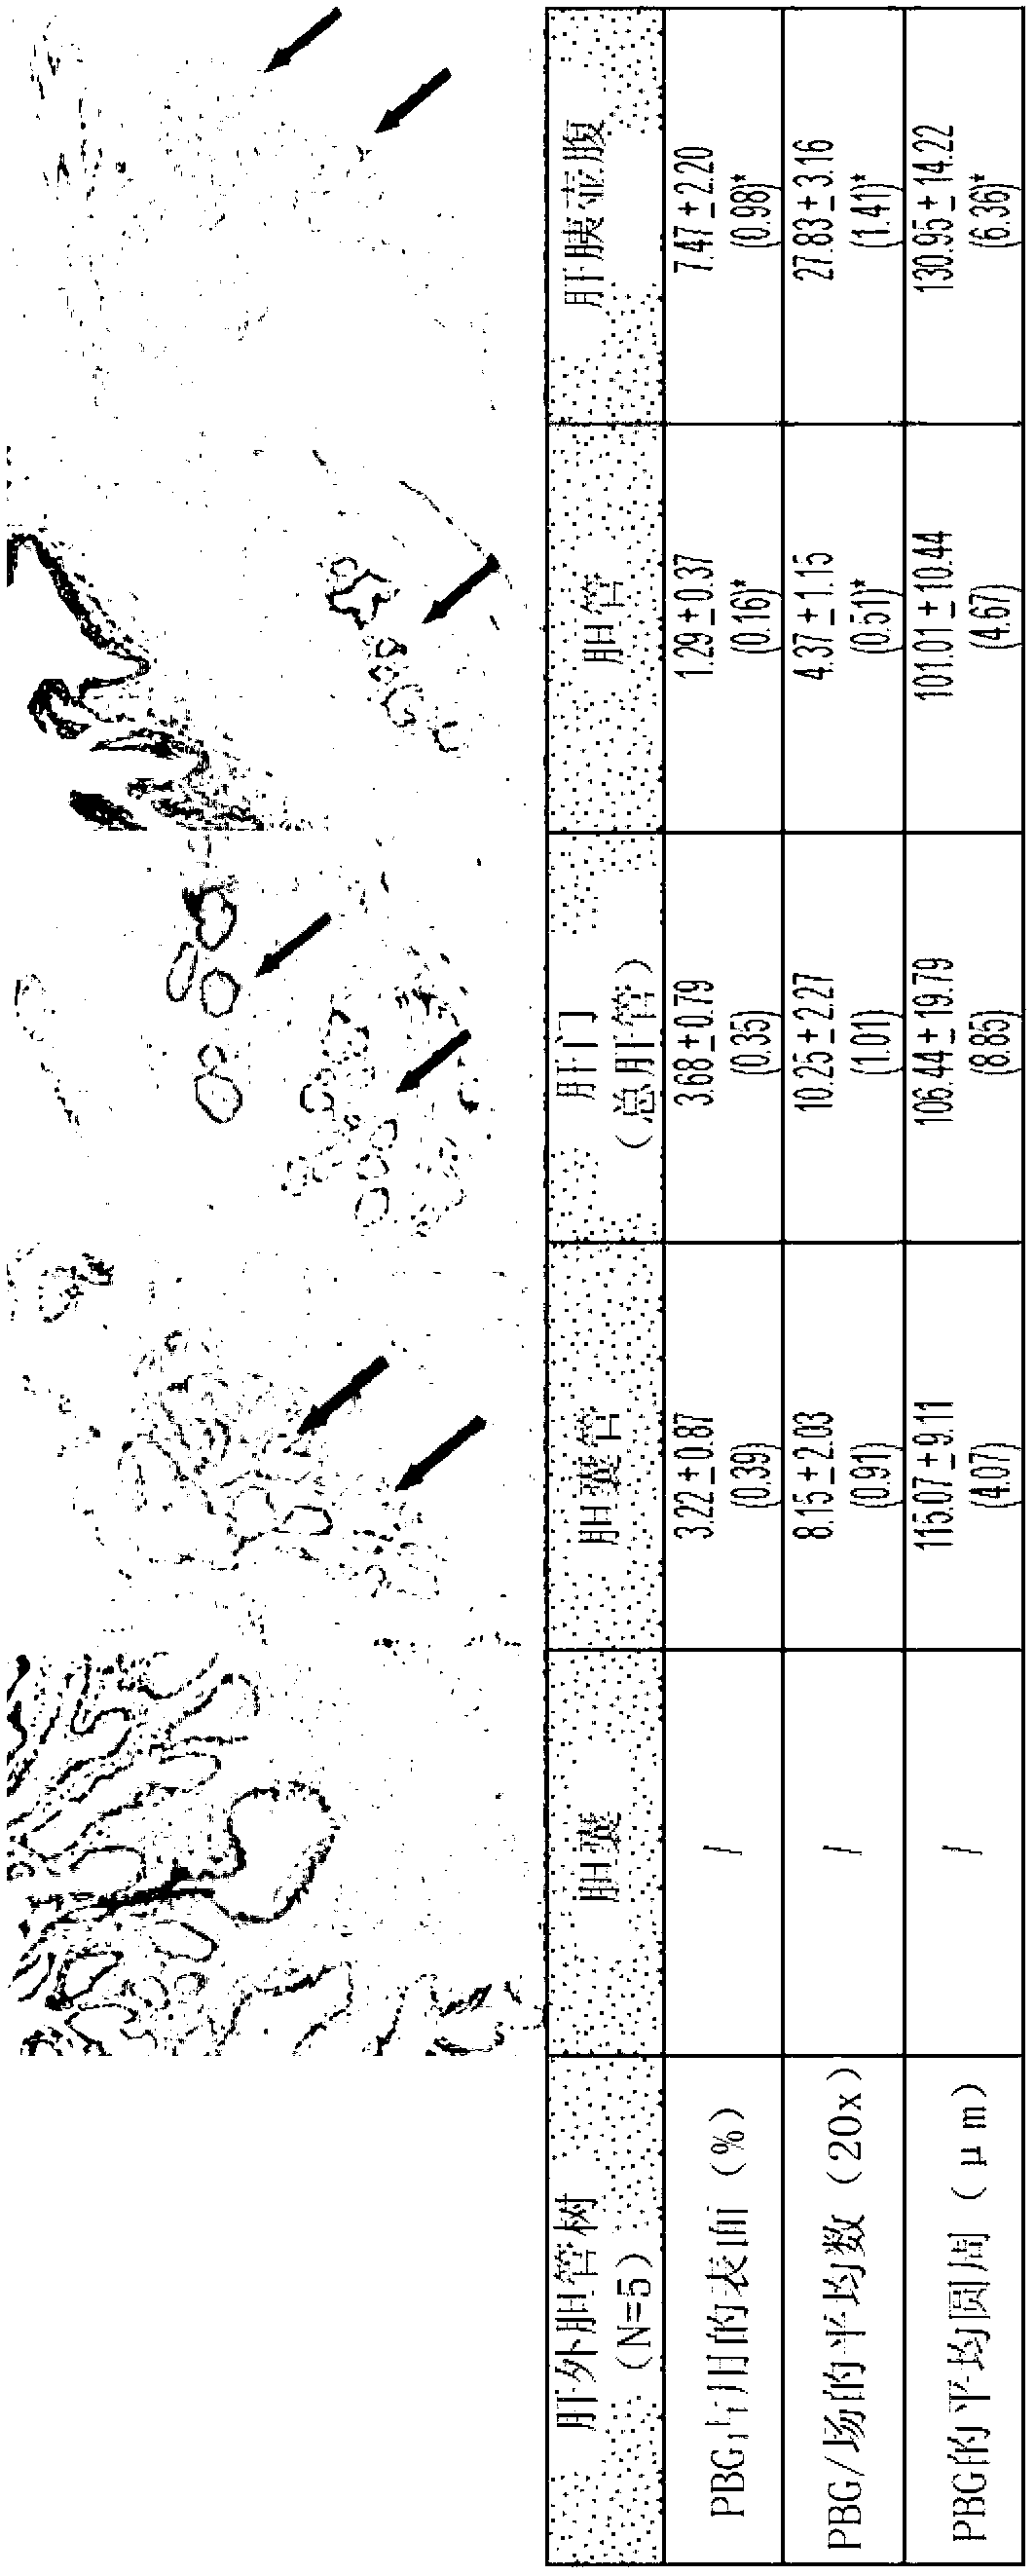 Multipotent stem cells from the extrahepatic billary tree and methods of isolating same